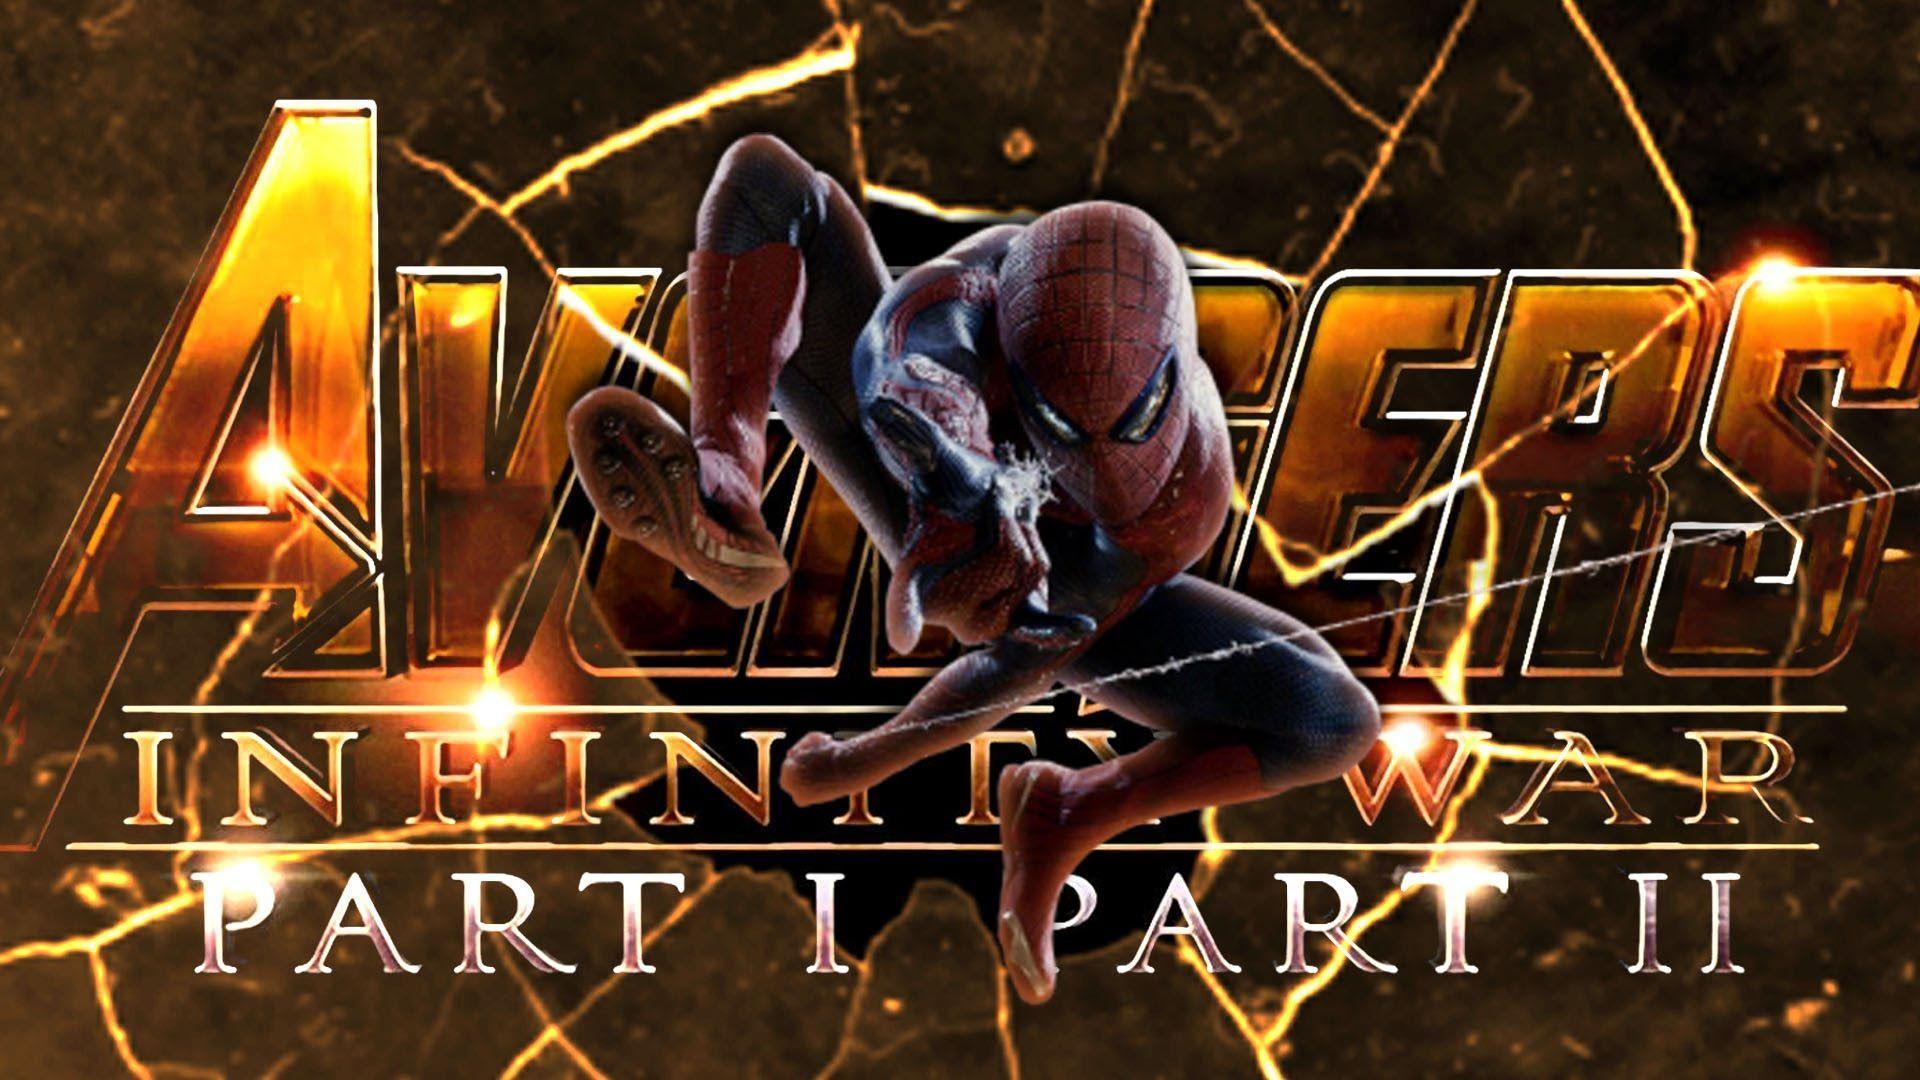 Will Spider Man Make Avengers Infinity War Appearance?